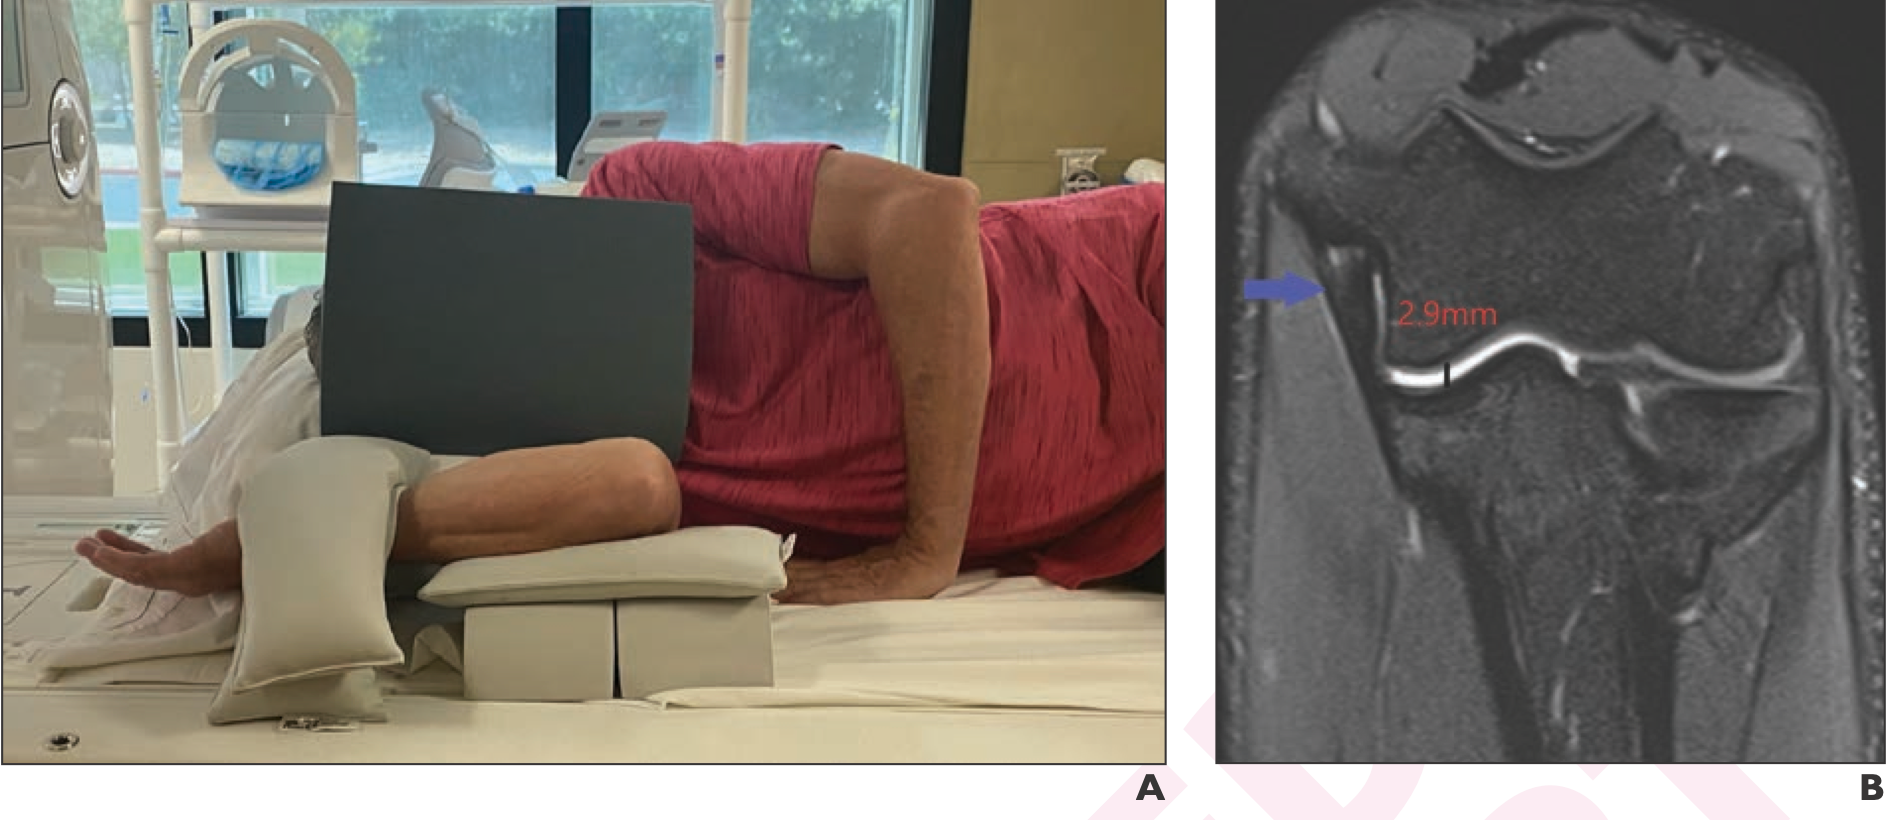 (a) Side view of a volunteer demonstrating proper positioning for the flexed elbow valgus external rotation (FEVER) view; note the elevated flexed elbow and sandbags to induce valgus stress. The elbow coil is not included in the image. (b) Coronal fat-saturated proton-density weighted MR image in FEVER view in 20-year-old male pitcher shows a normal anterior bundle of the ulnar collateral ligament (blue arrow) and 2.9 mm ulnotrochlear articular width. (c) Sagittal scout view shows flexed elbow position; lines depict the approximately 35° scan angle for the FEVER view.

Credit: American Journal of Roentgenology